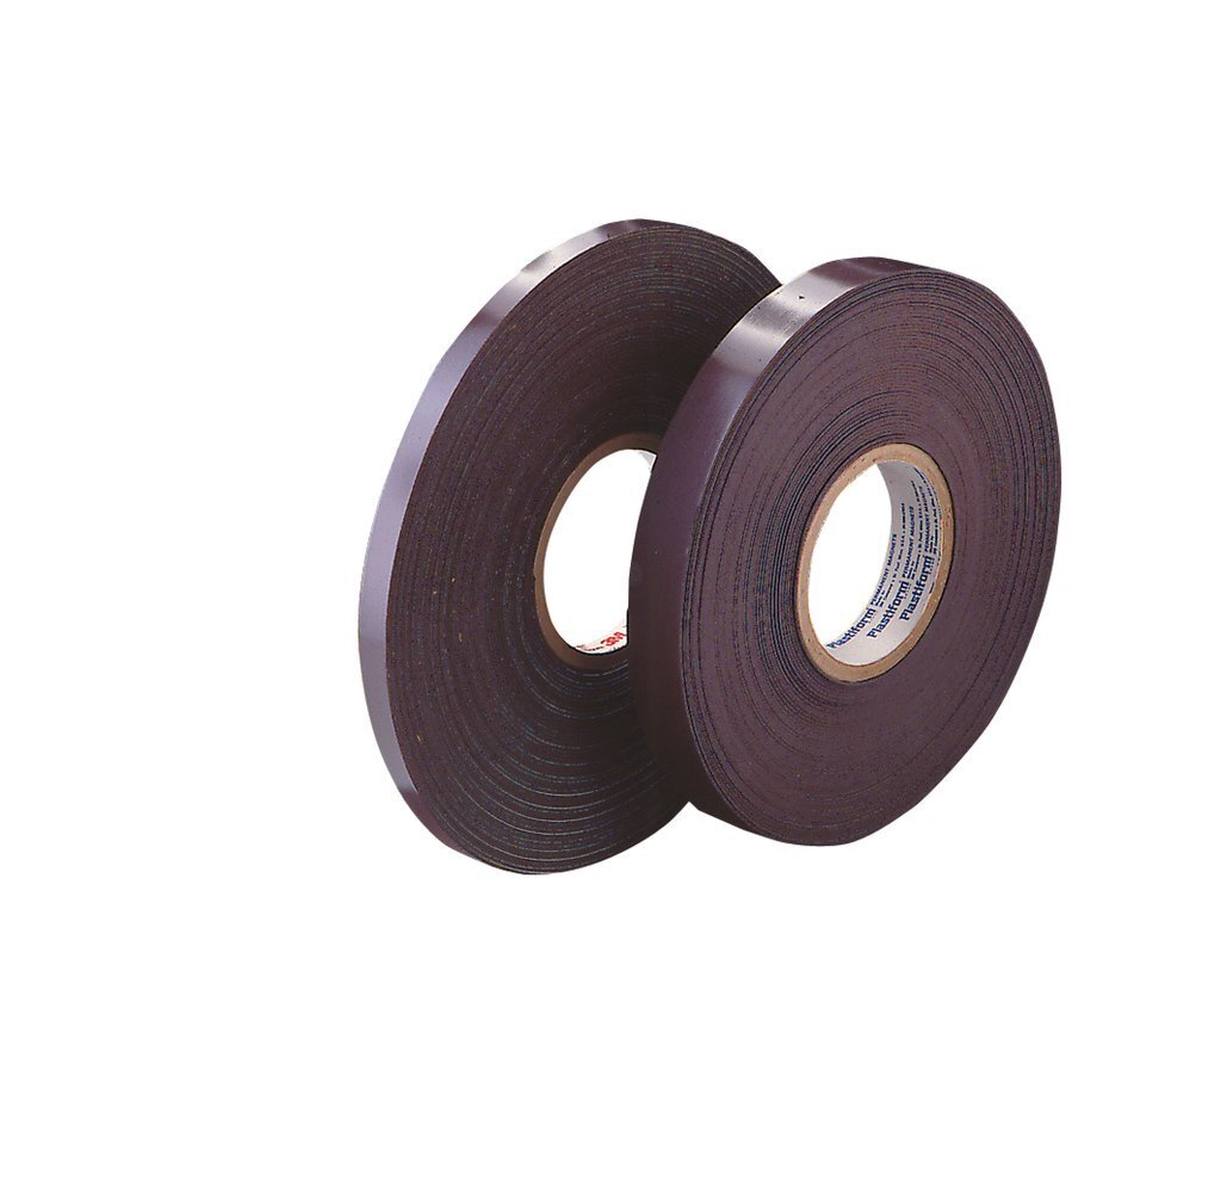 3M 1316 Magnetic adhesive tape, brown, 12 mm x 30.5 m, 0.9 mm